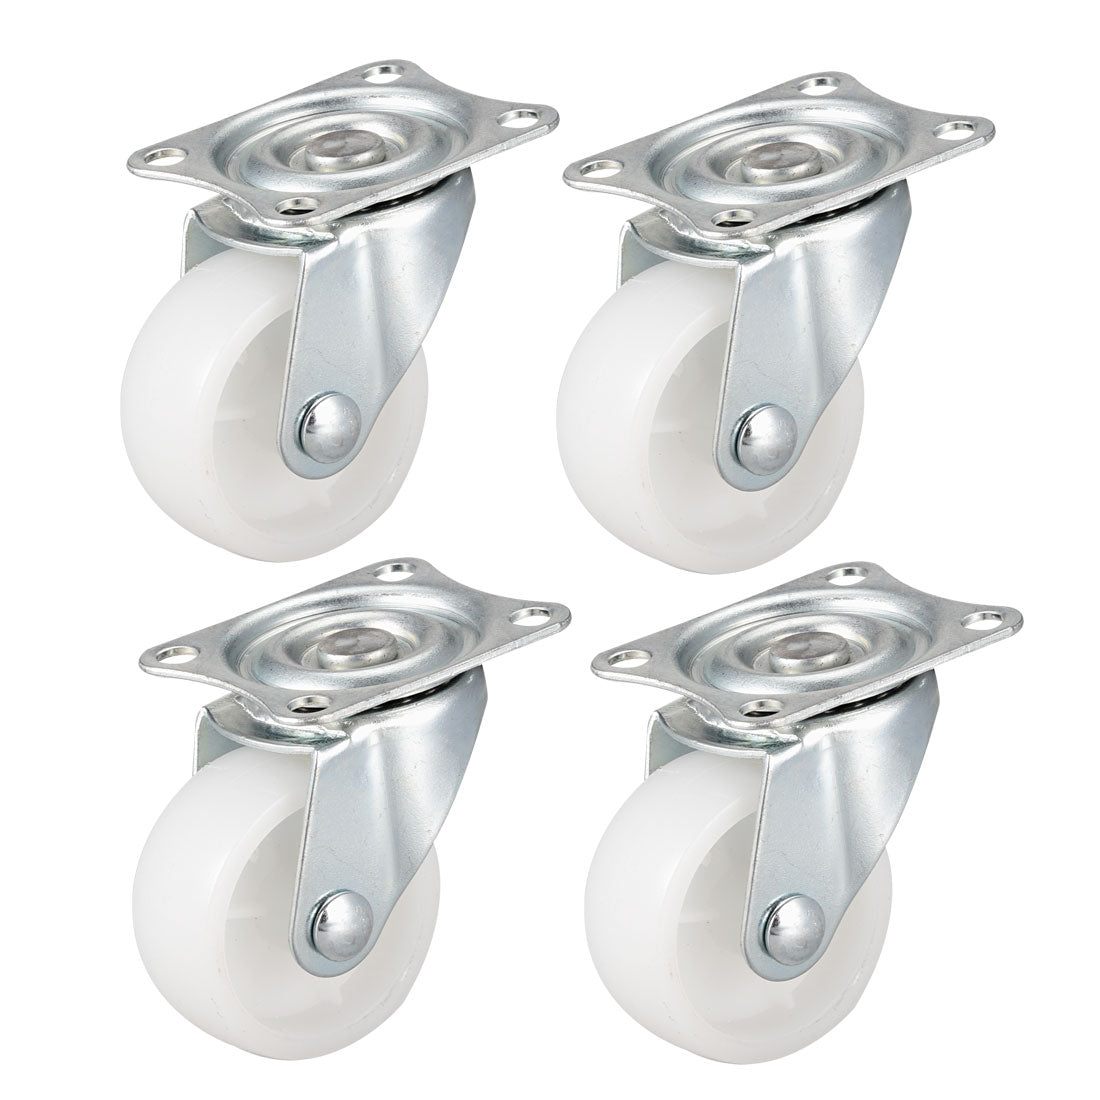 Uxcell Uxcell 2 Inch Swivel Caster Wheels PP 360 Degree Top Plate Mounted Caster Wheel 66lb Capacity 4 Pcs